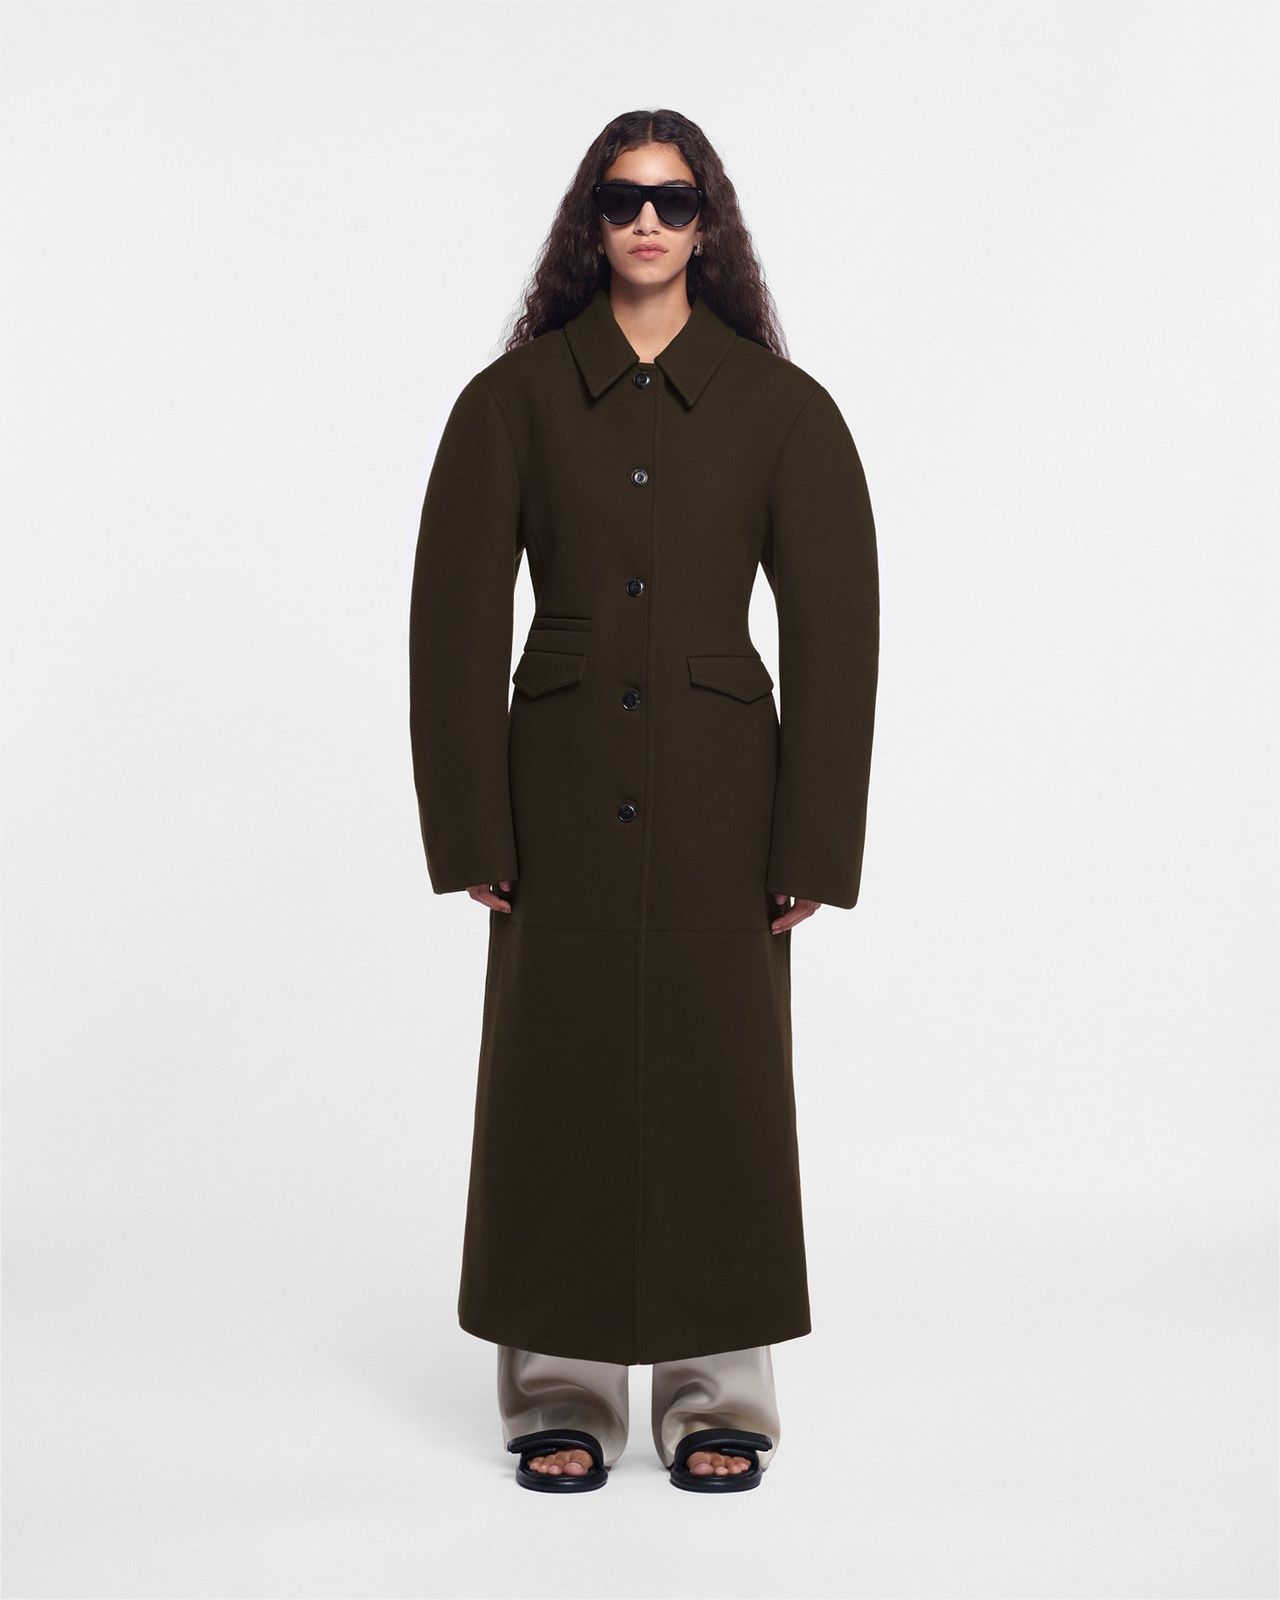 The 25 Best Winter Coats for Women for Every Budget | Who What Wear